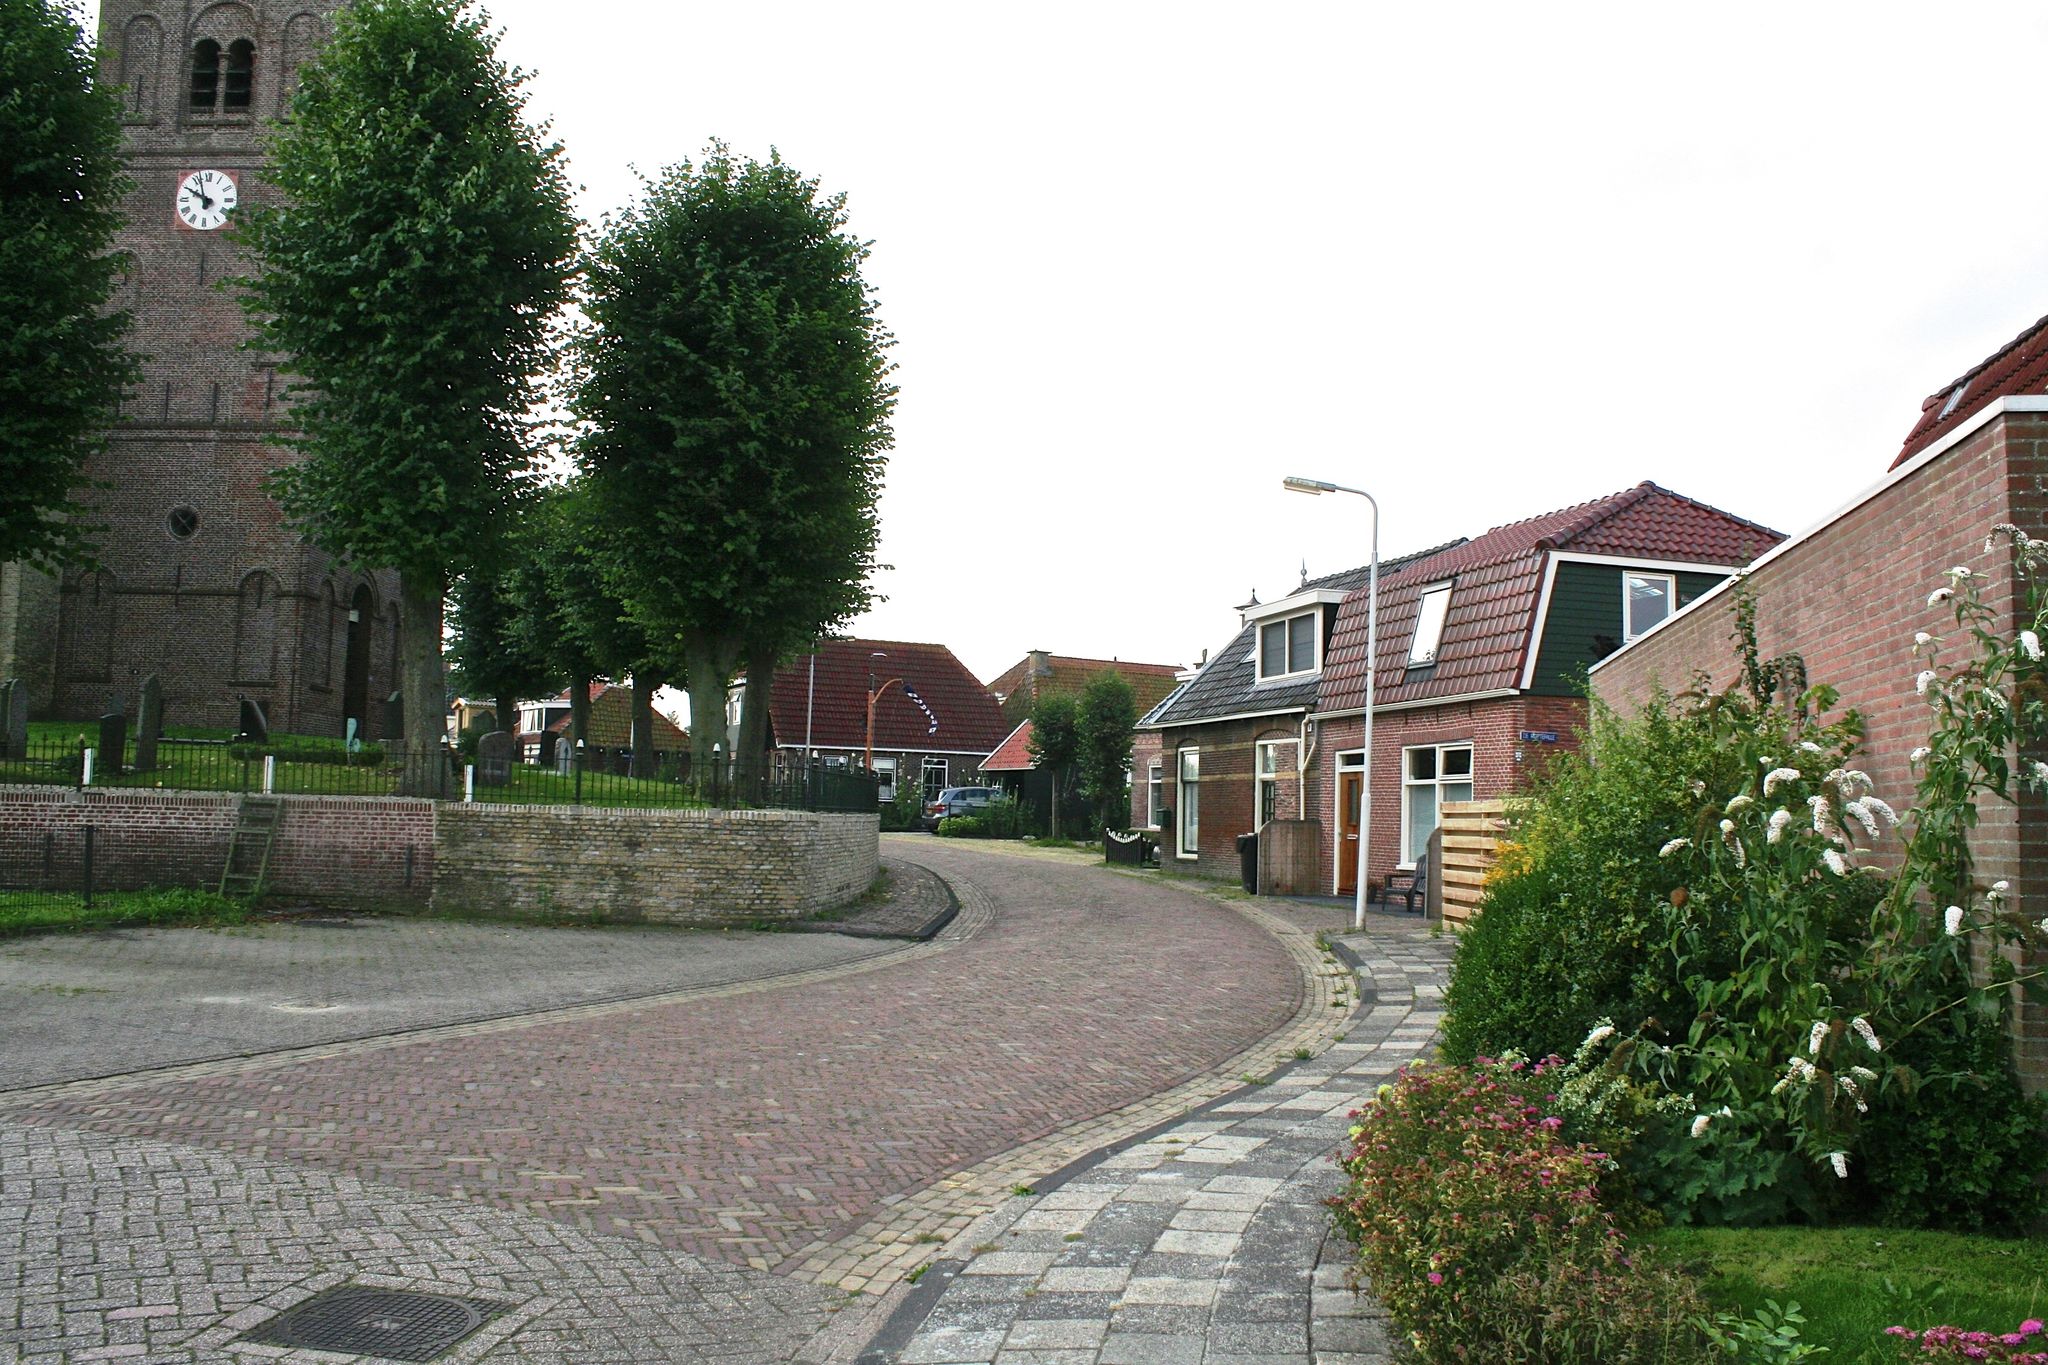 Holiday home near the Frisian Eleven Cities